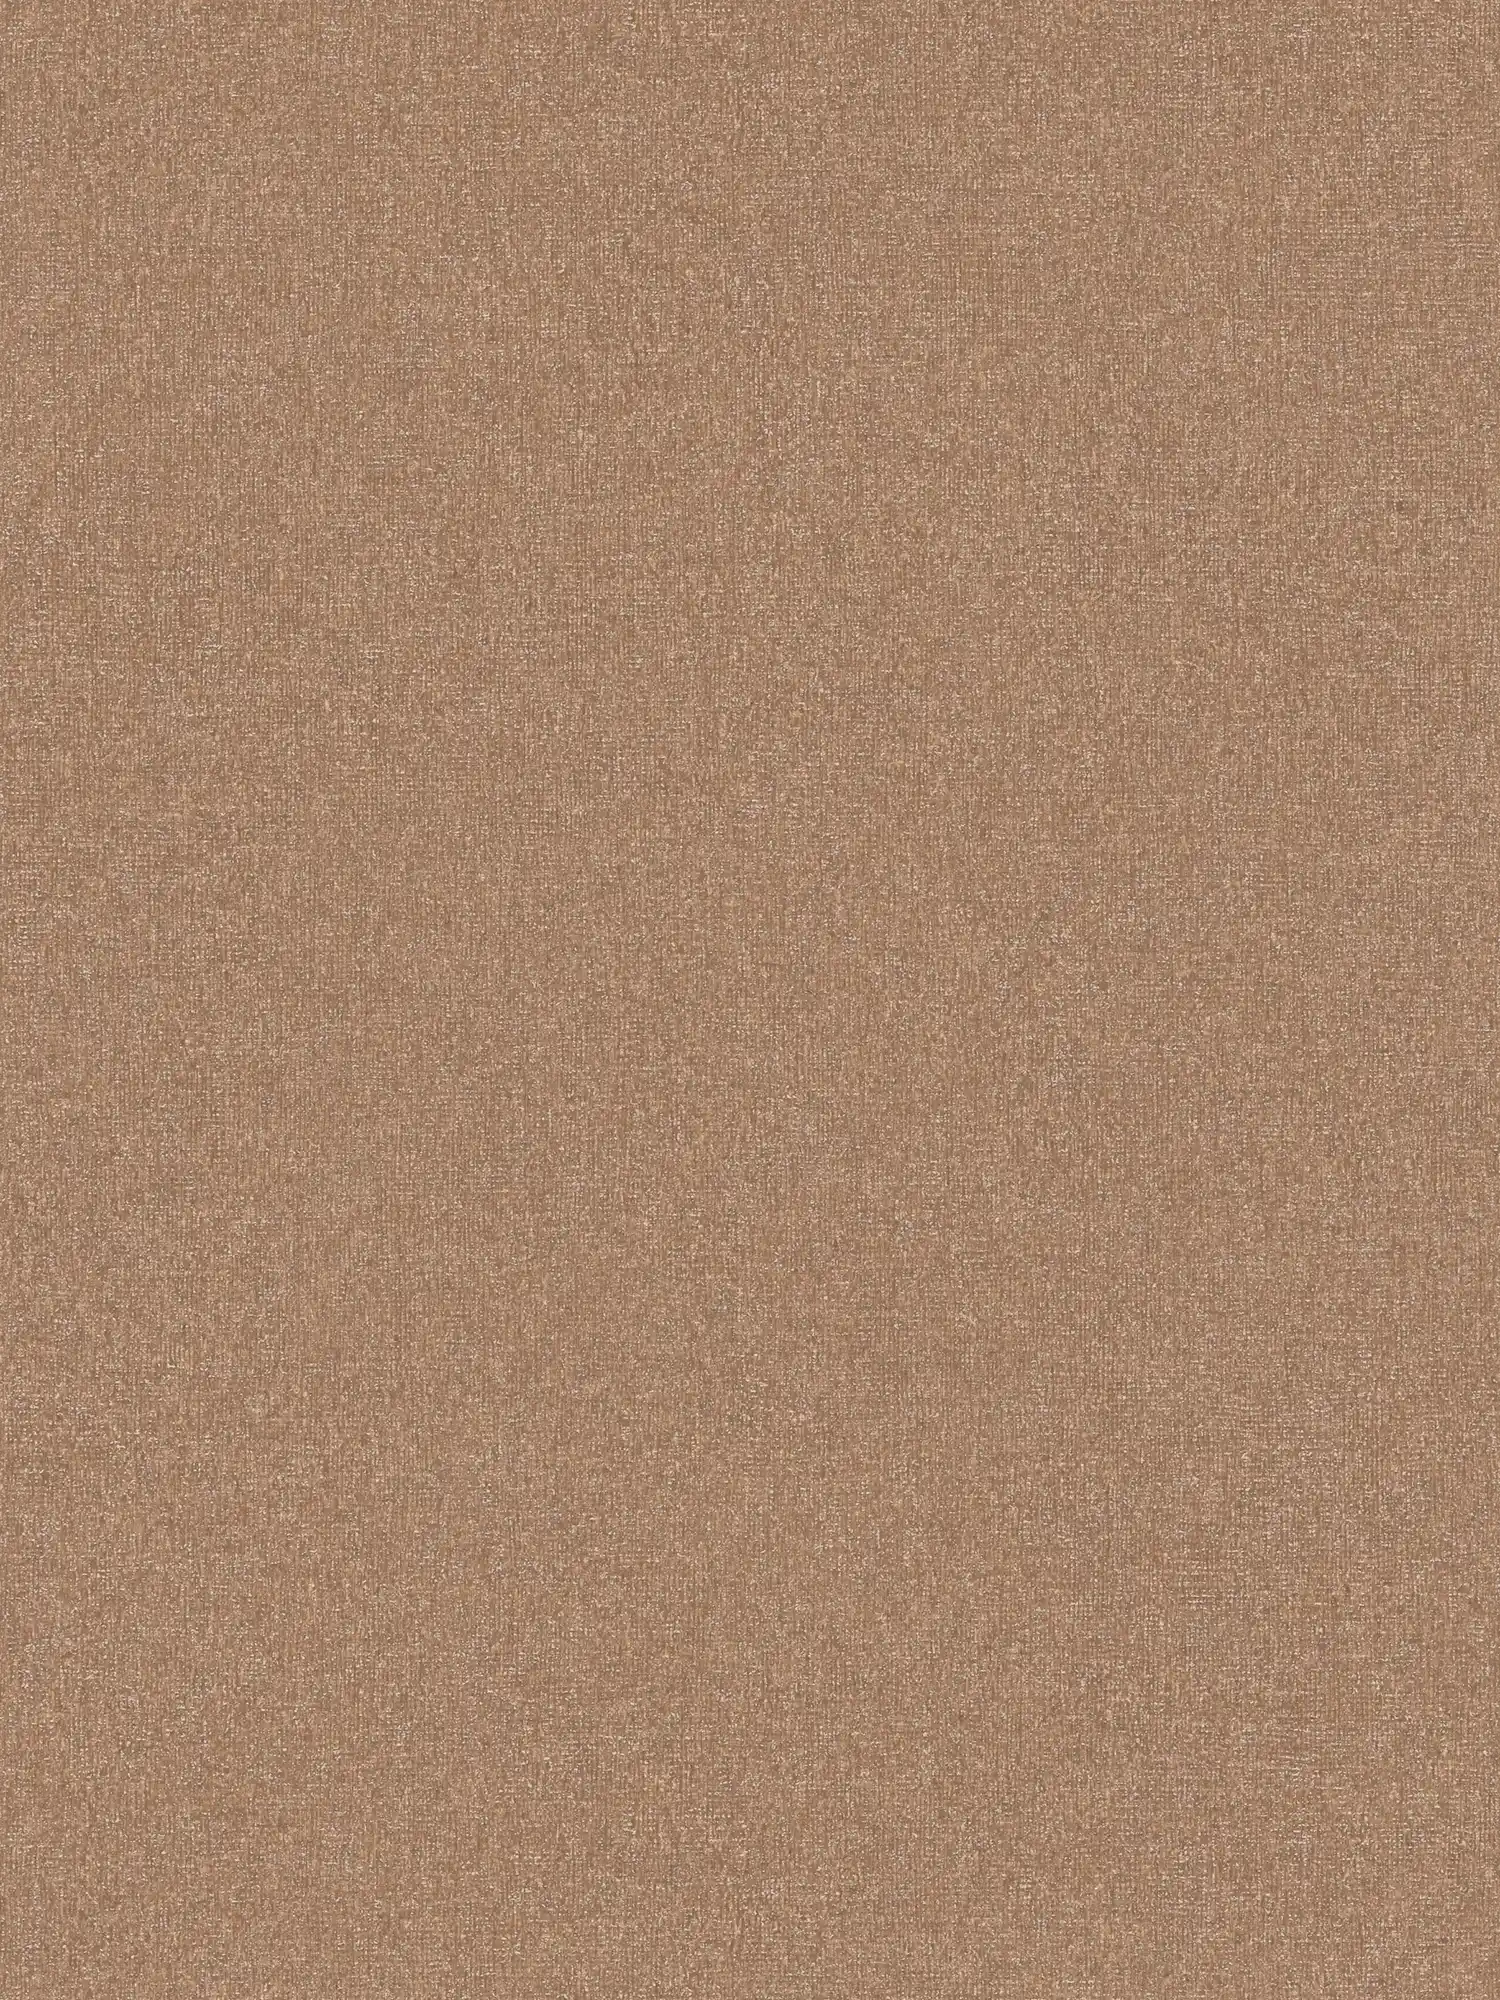 Non-woven wallpaper plains with fine structure - brown
